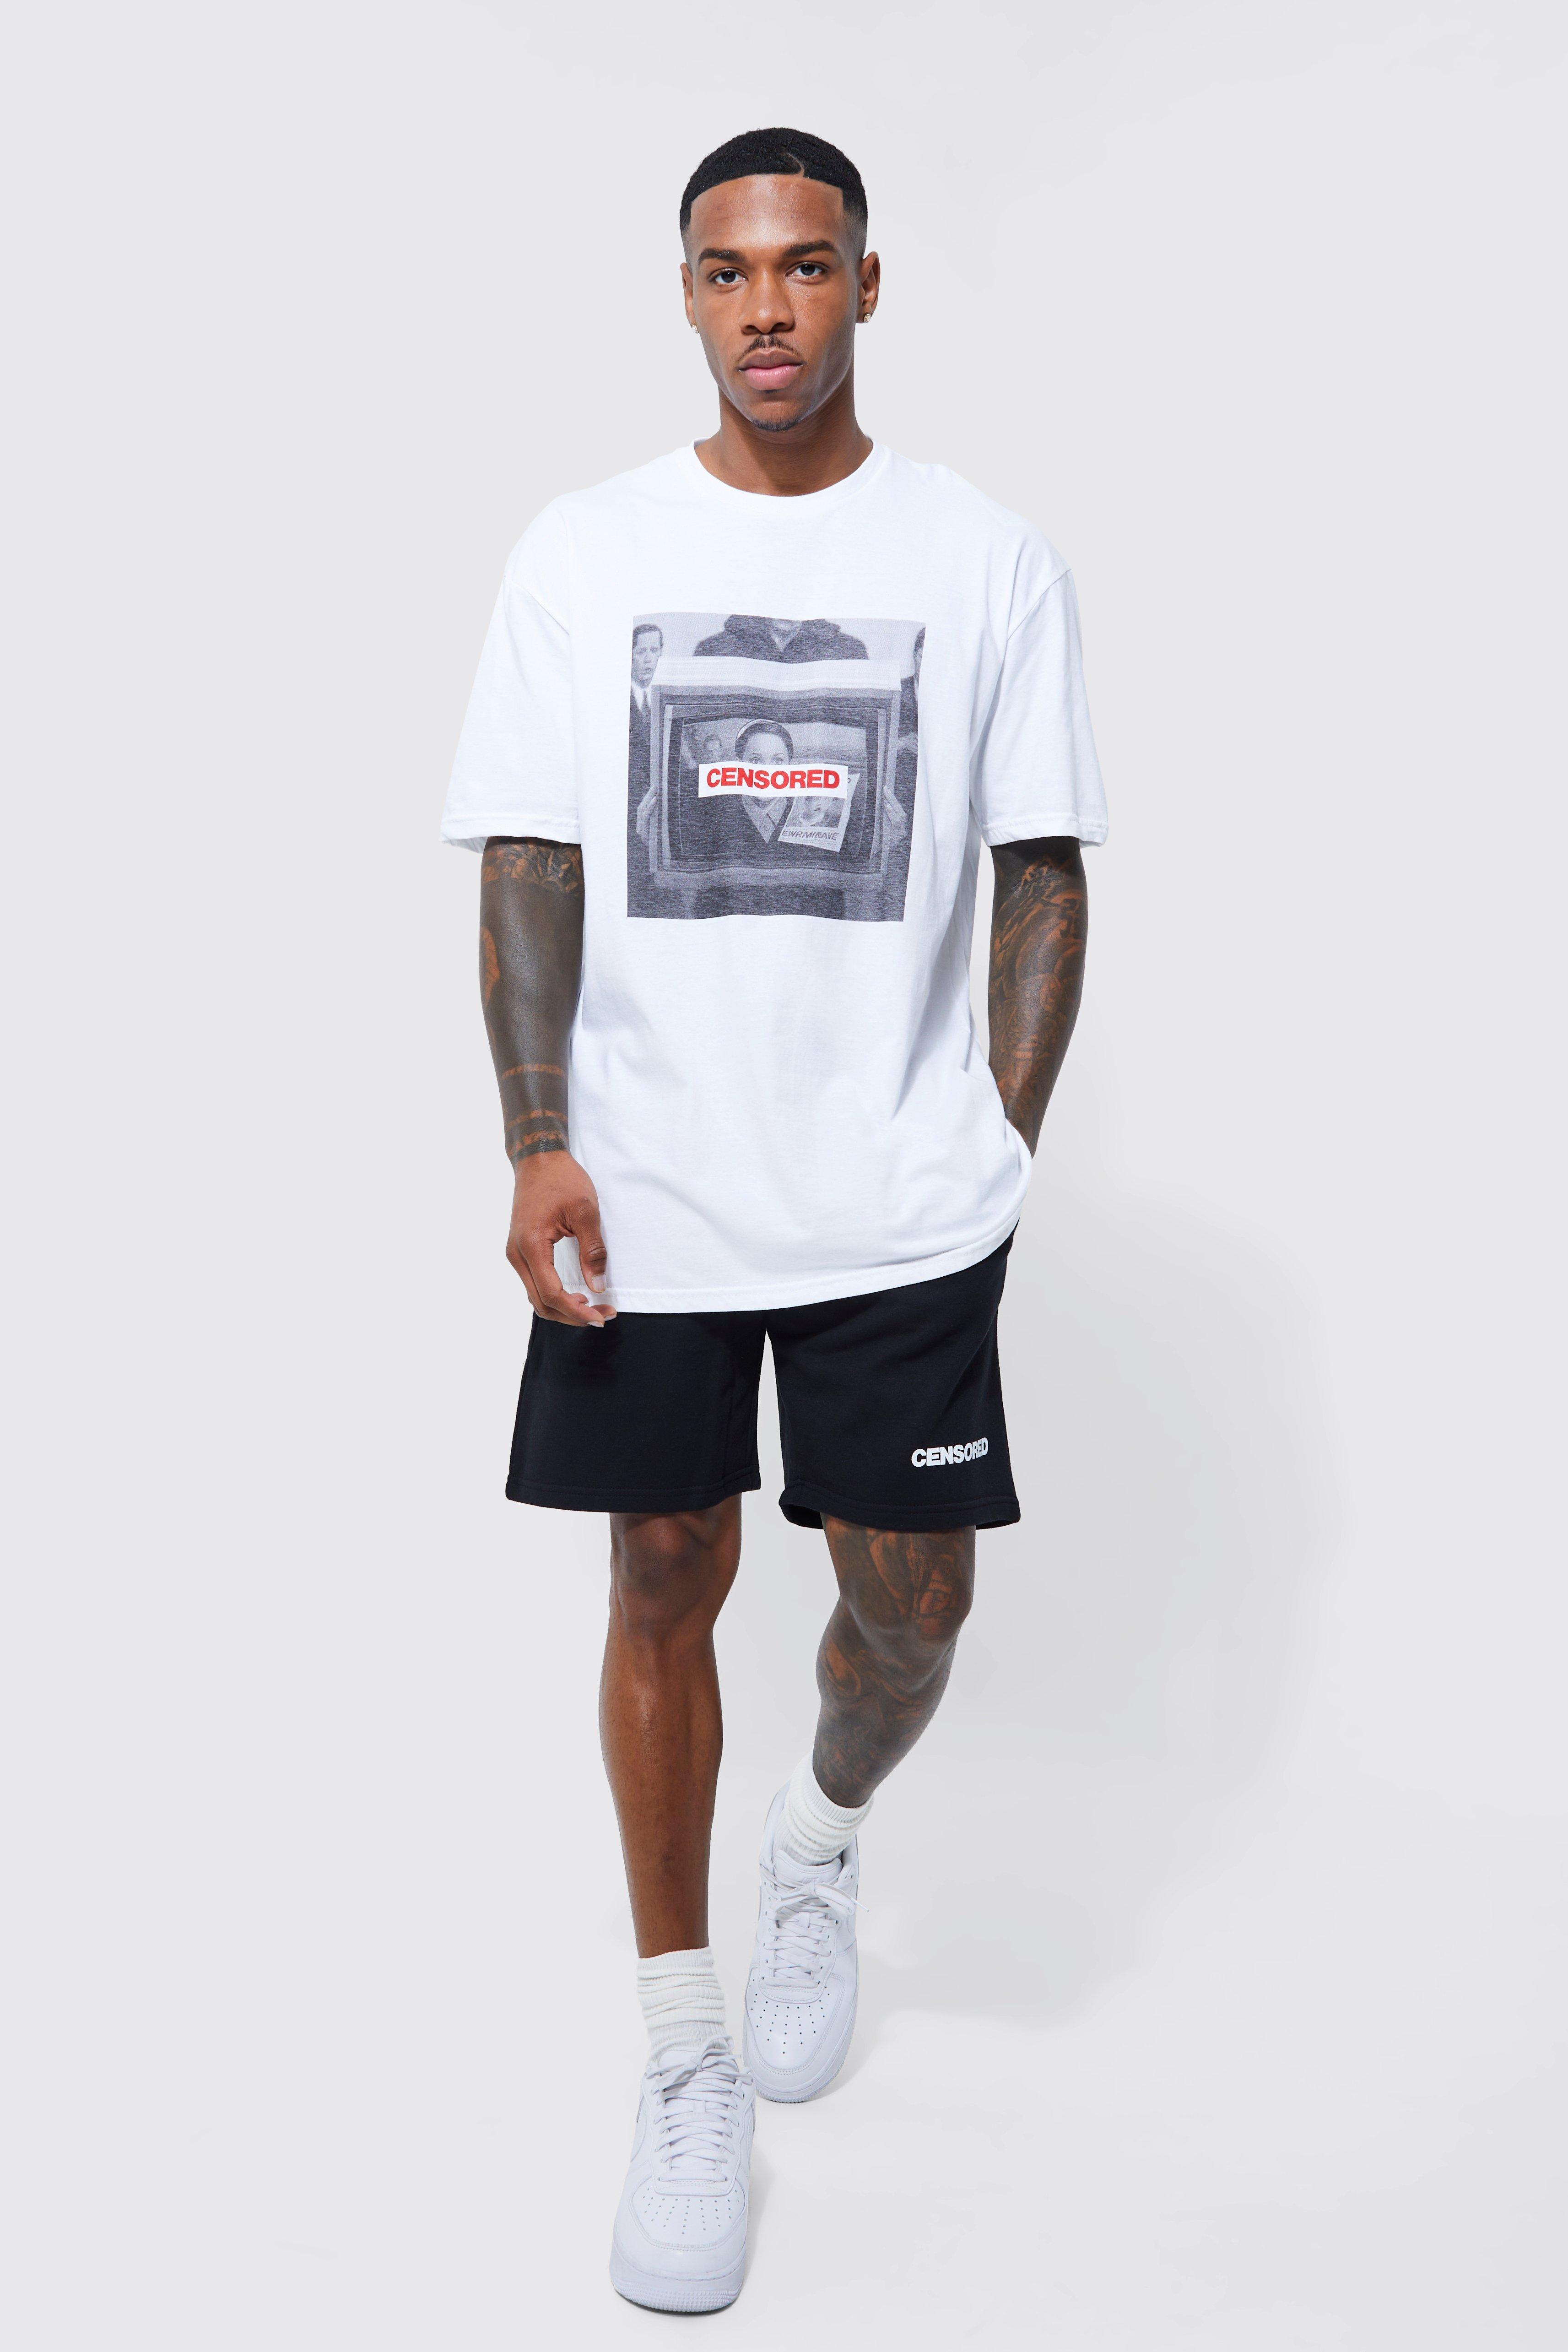 Boohoo Oversized Censored Picture T-shirt Set in White for Men | Lyst